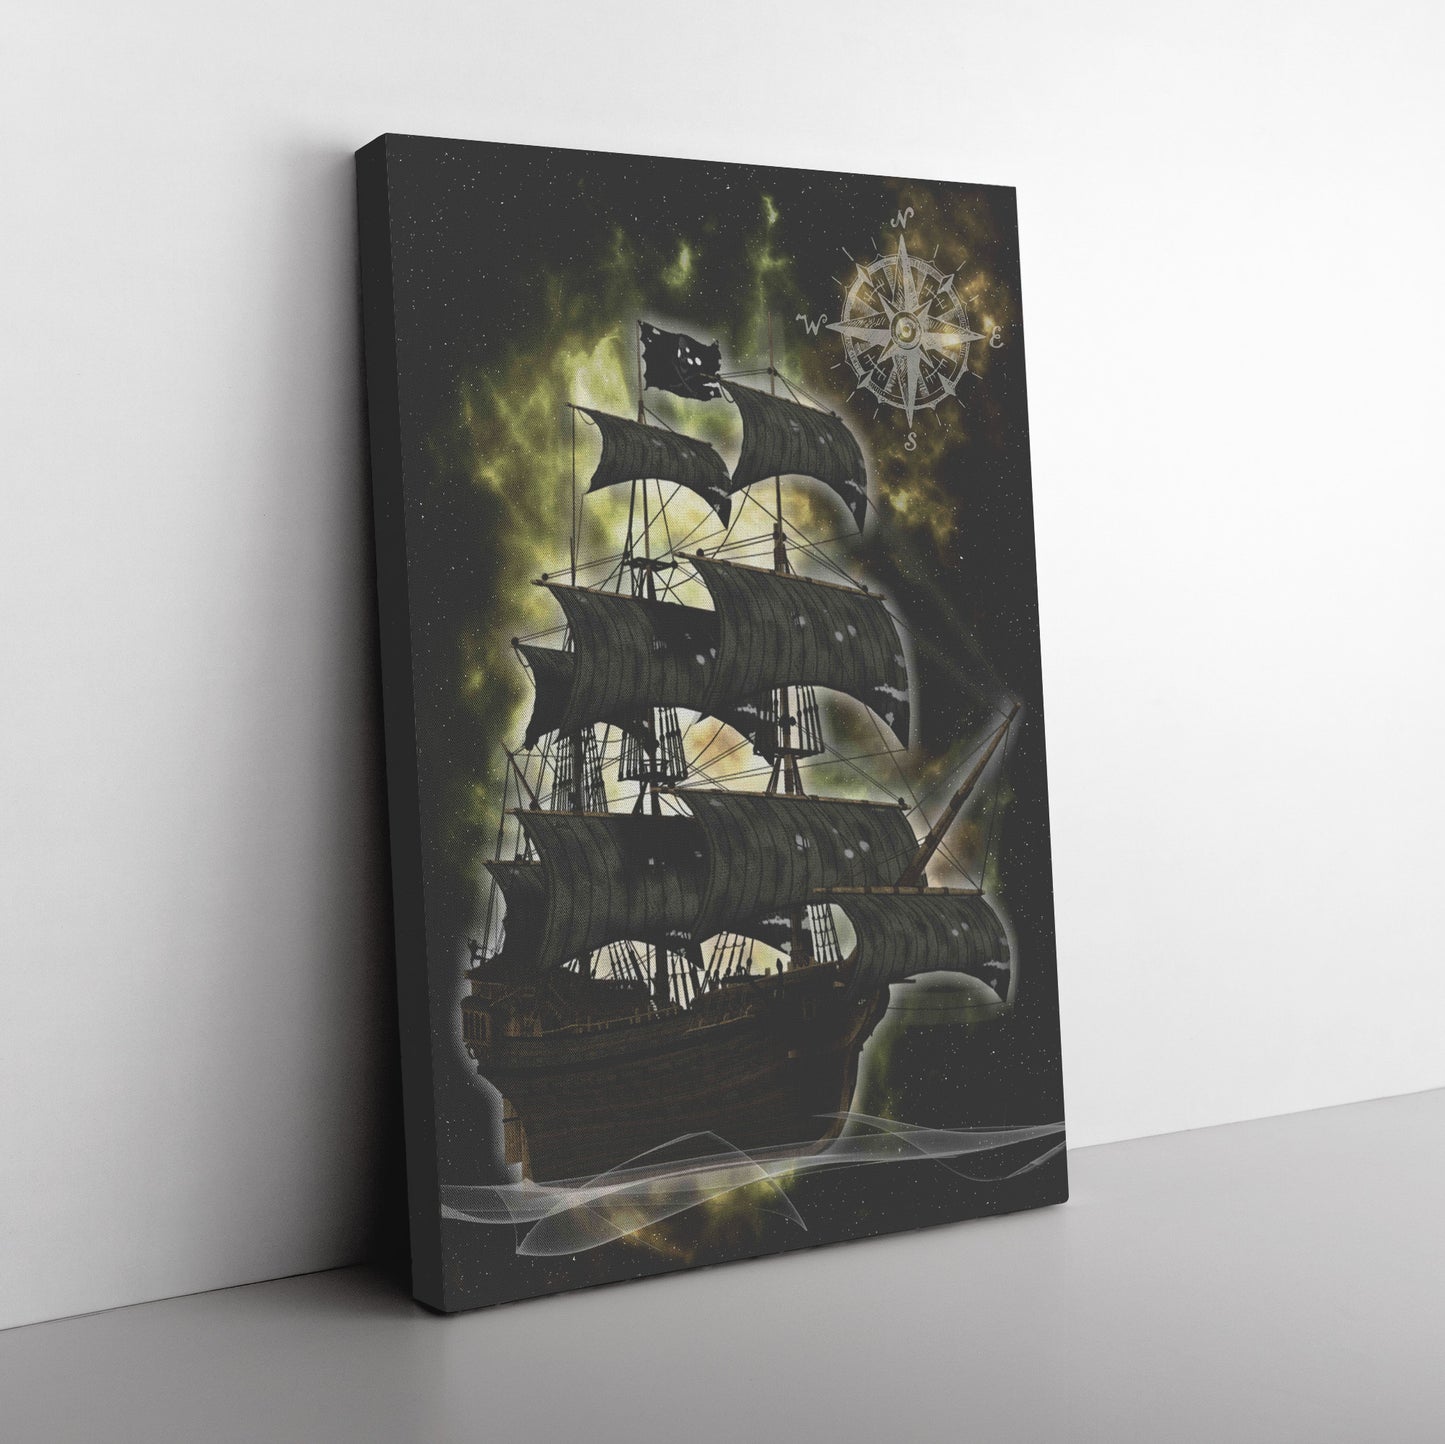 Pirate Ghost Ship Canvas Print - Yellow